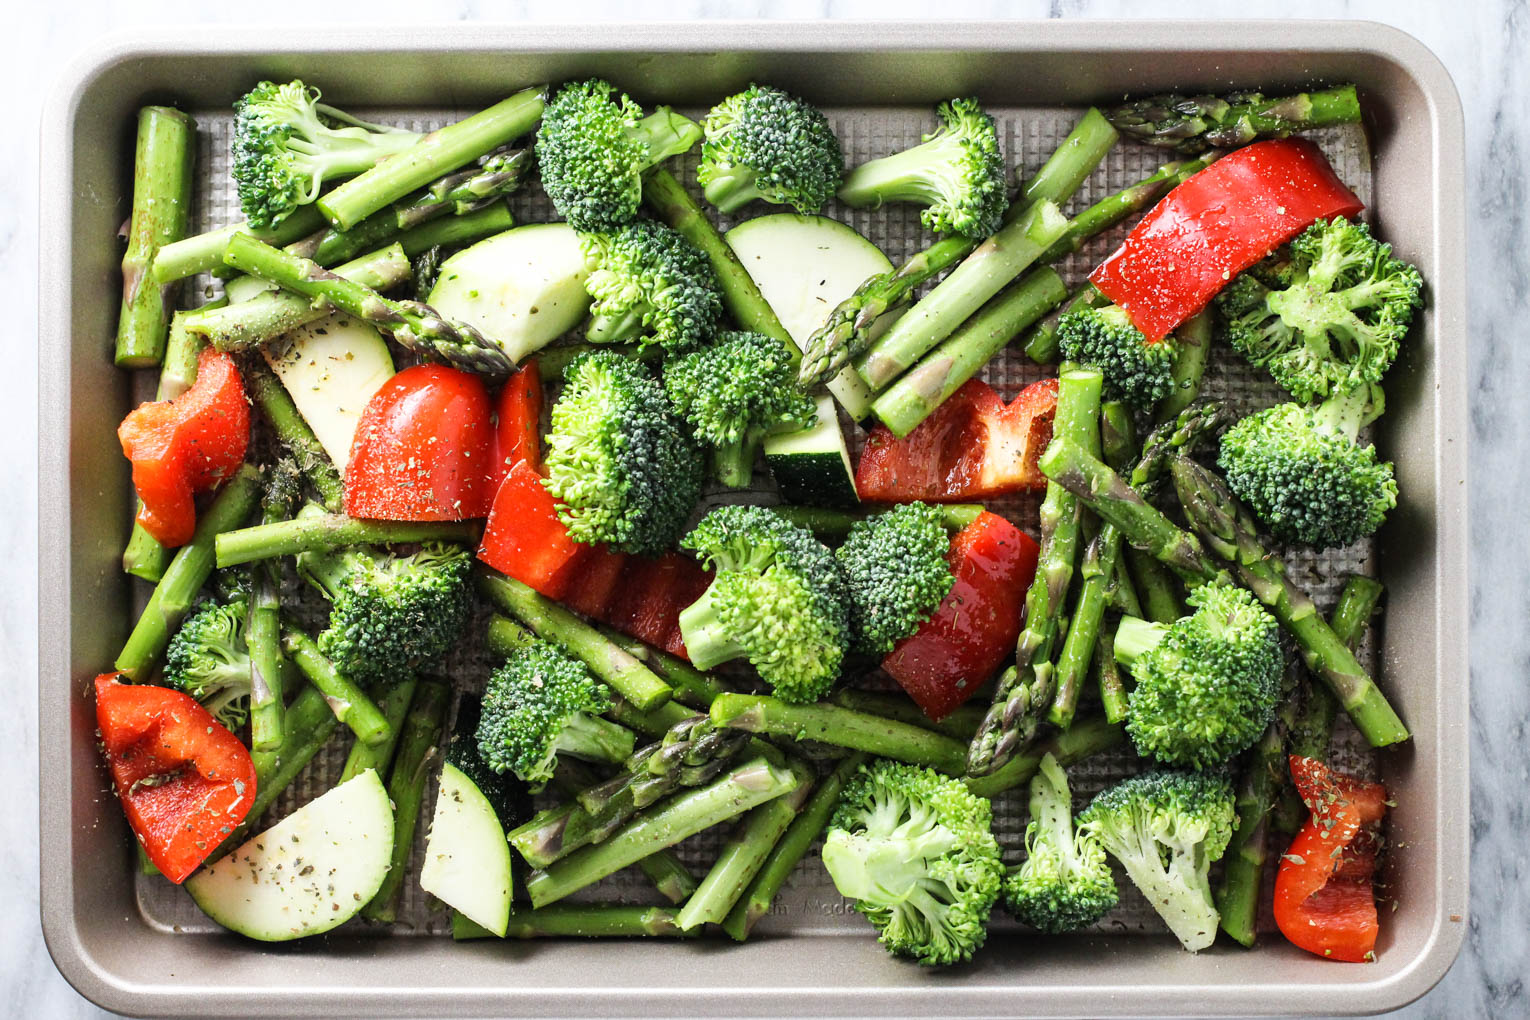 Mixed vegetables on a baking sheet, seasoned with spices and olive oil.